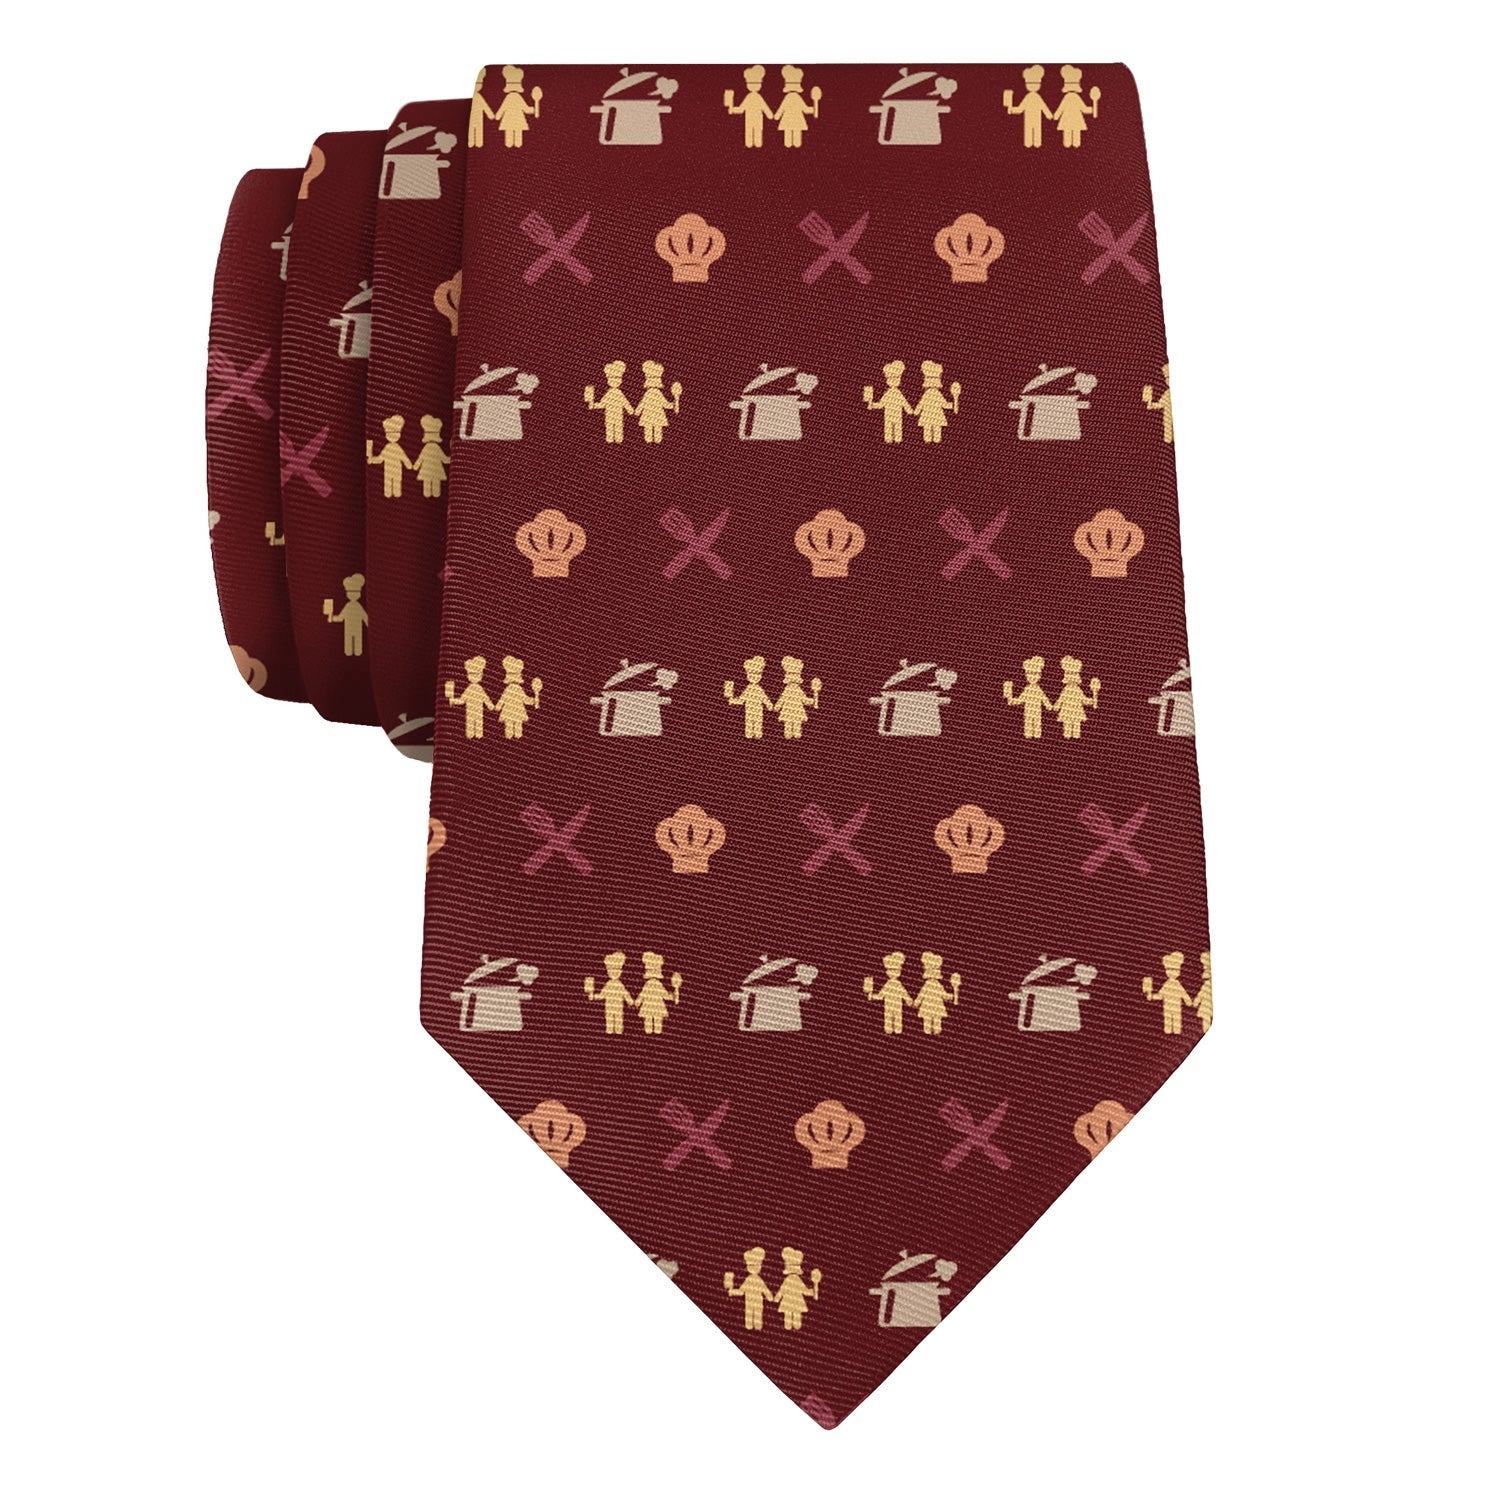 Cooking With Friends Necktie - Knotty 2.75" -  - Knotty Tie Co.